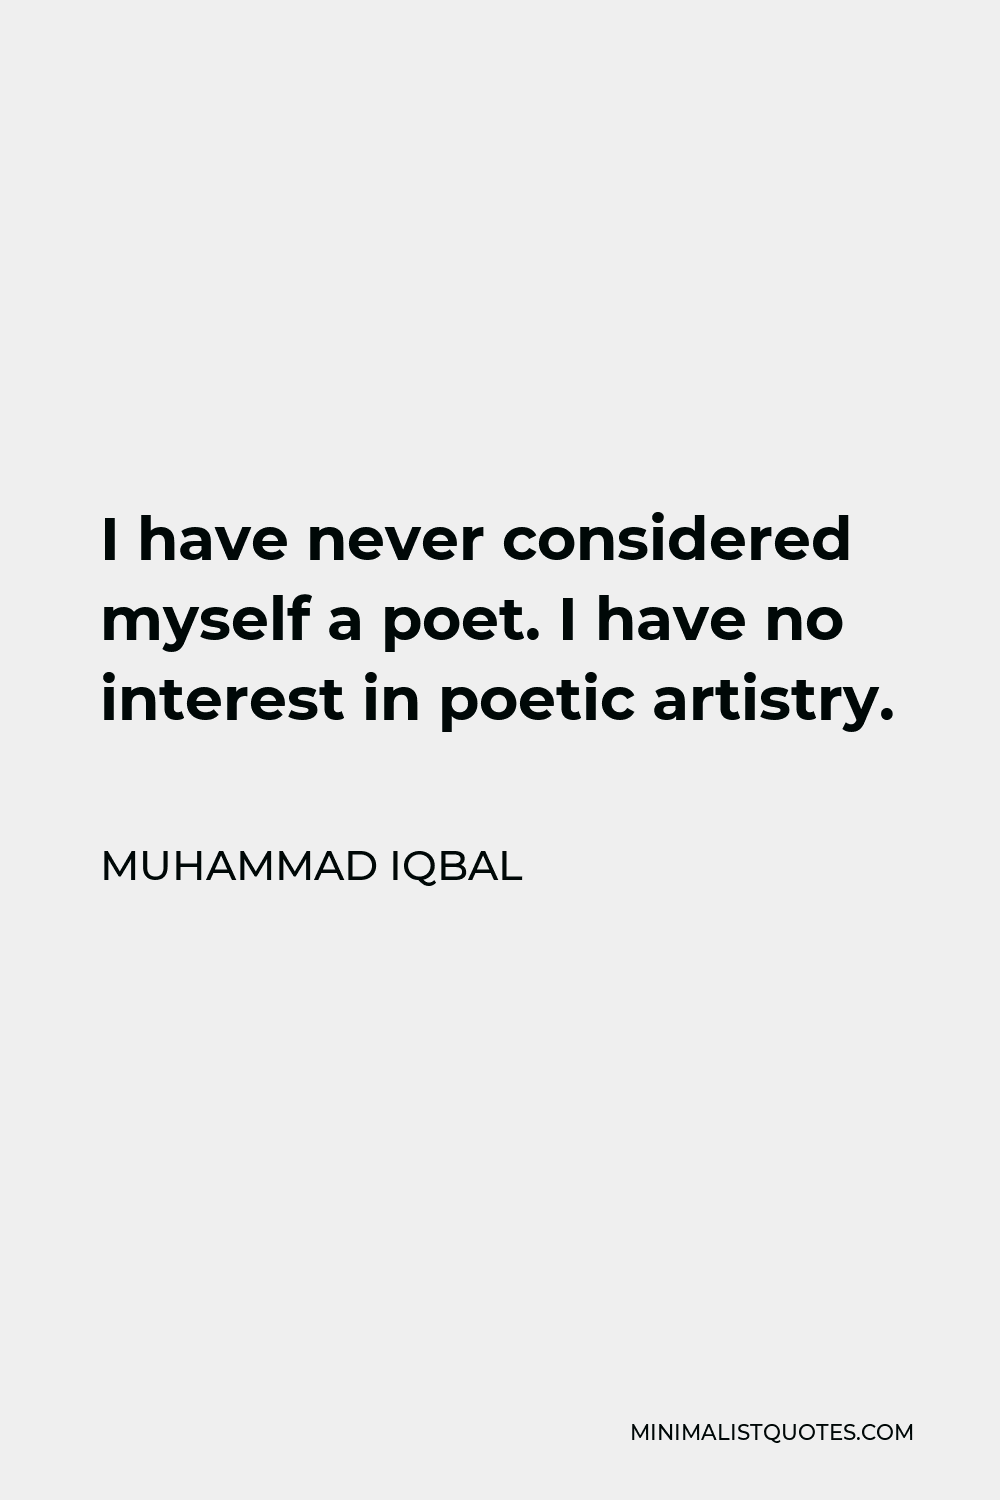 Muhammad Iqbal Quote - I have never considered myself a poet. I have no interest in poetic artistry.